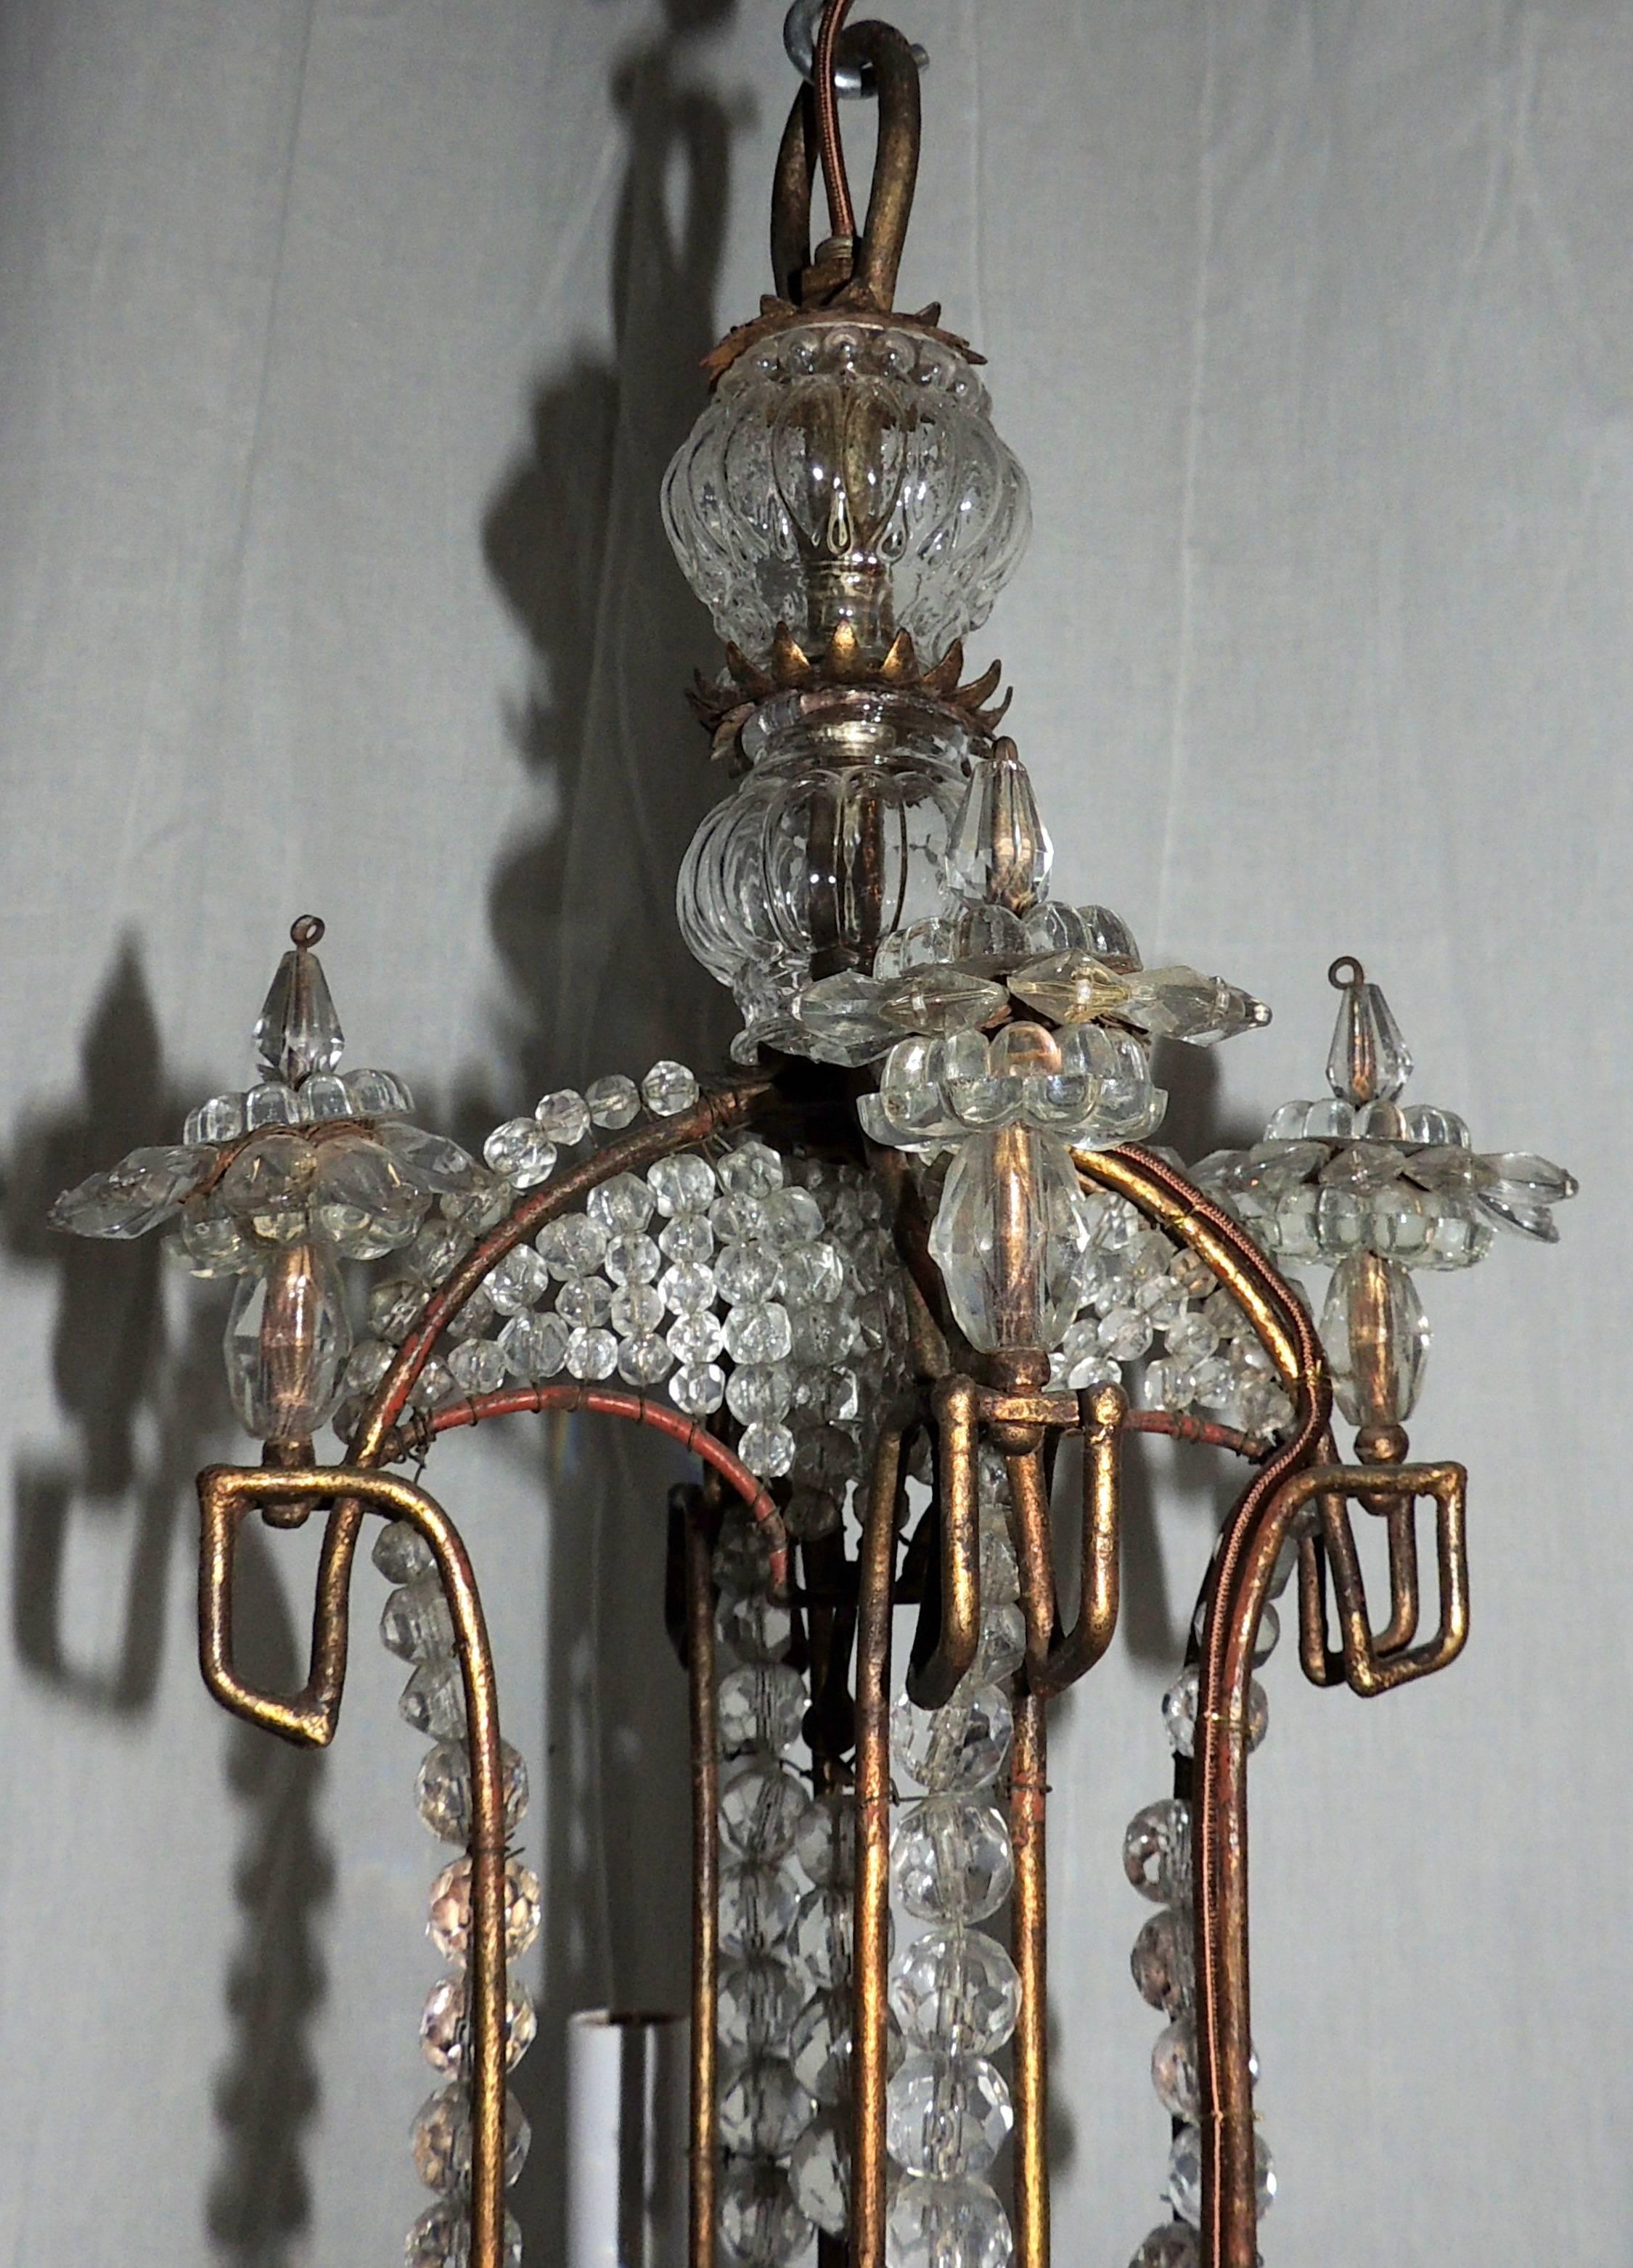 A wonderful beaded Italian Baguès style antique gold gilt, vintage tole chandelier in a pagoda form fixture.